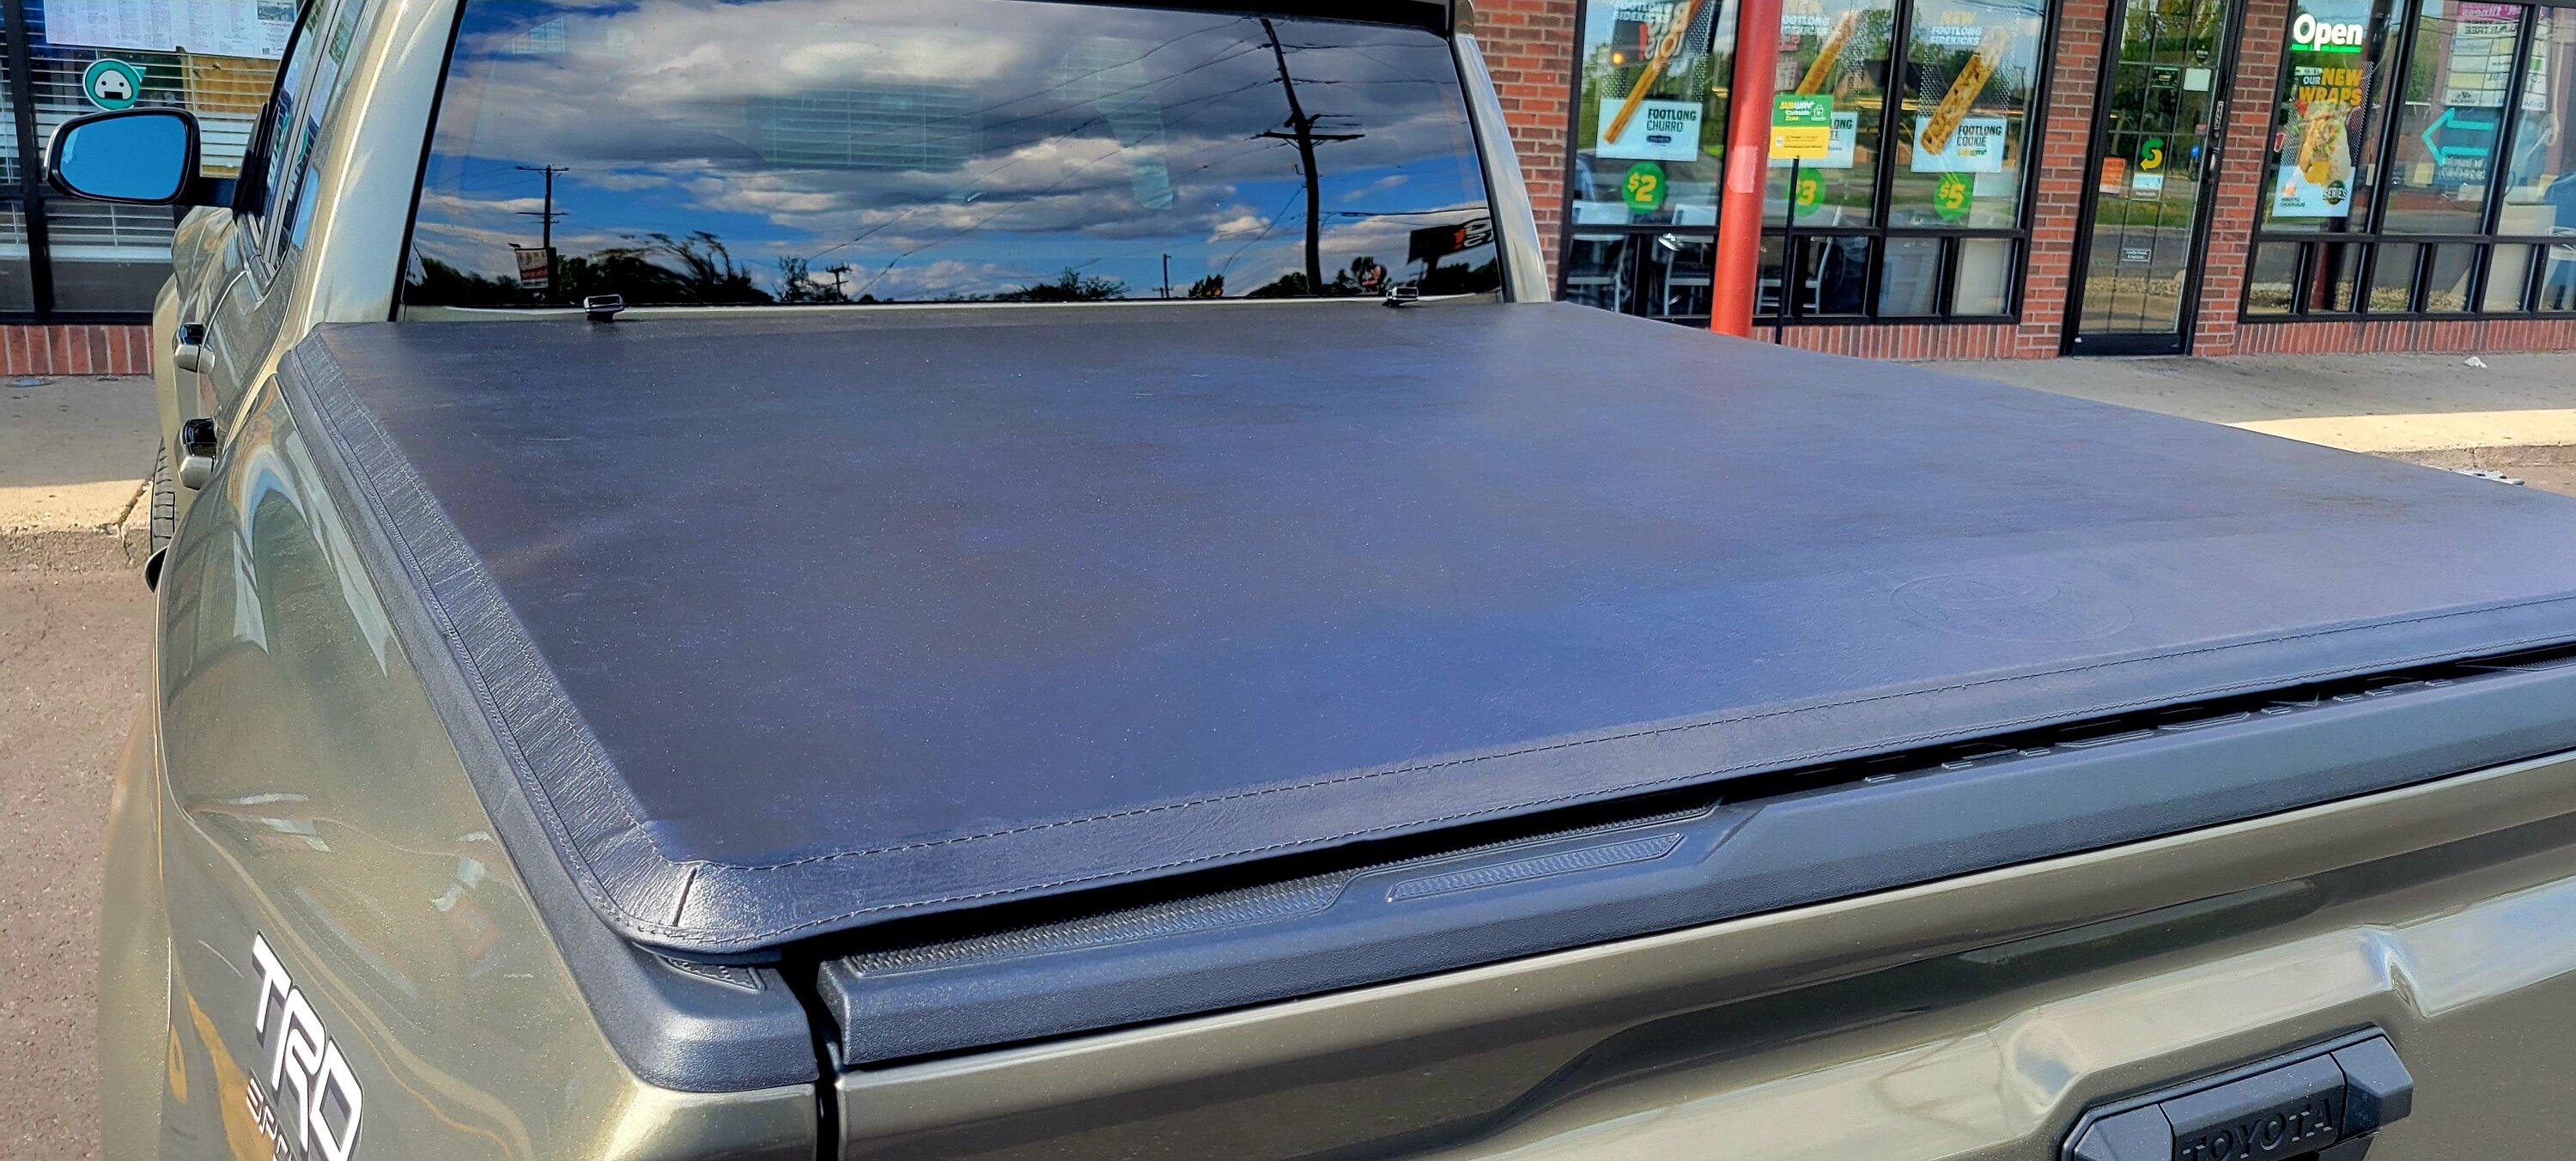 2024 Tacoma Toyota hard and soft tonneau covers now available says dealer 20240510_172135